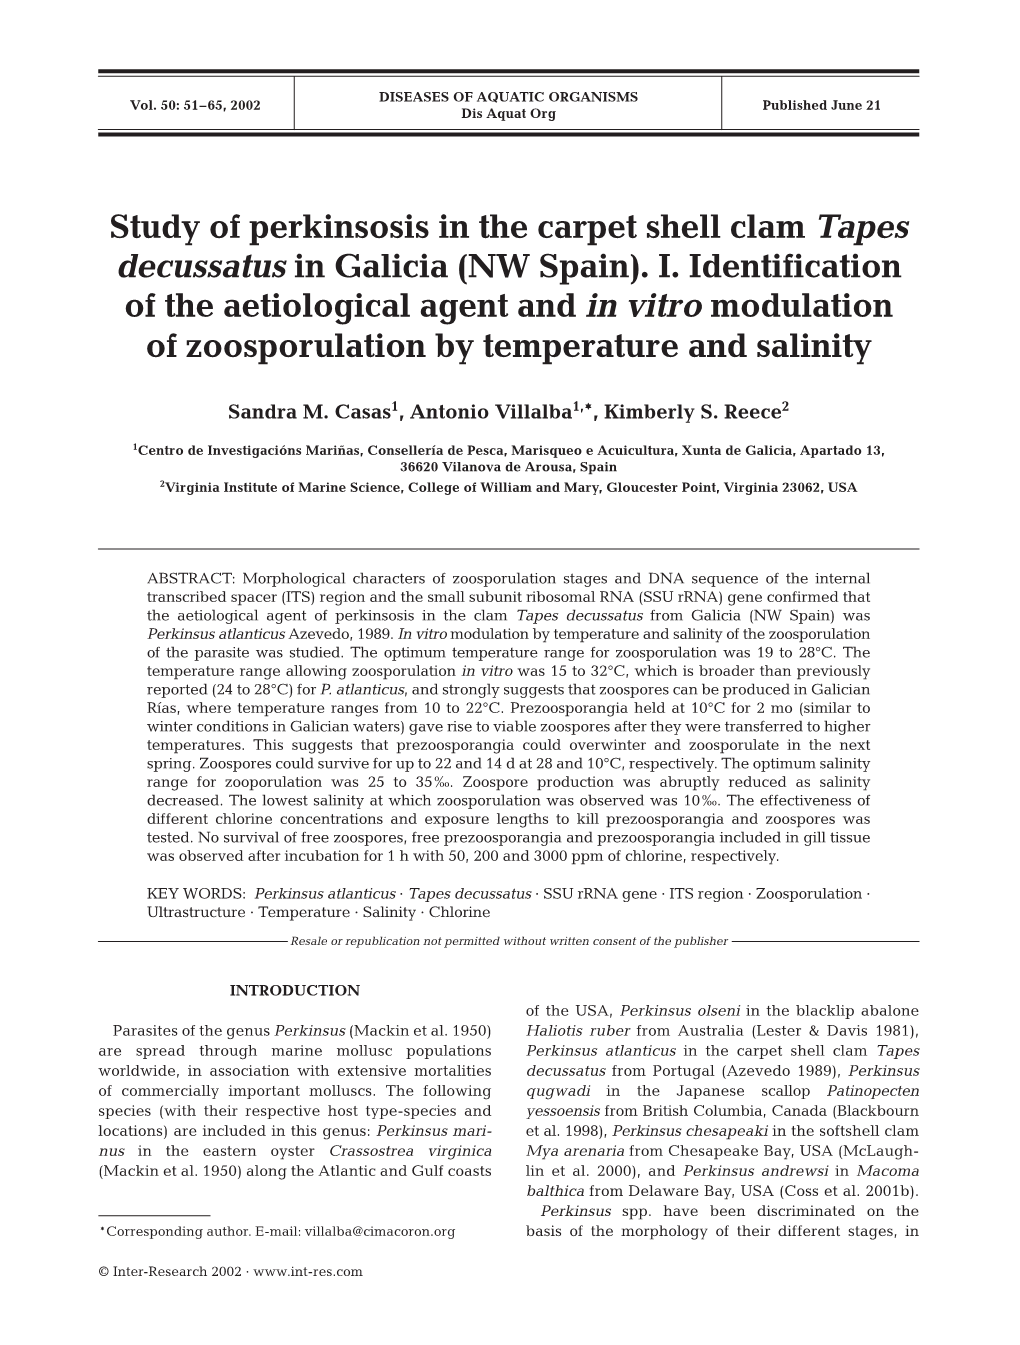 Study of Perkinsosis in the Carpet Shell Clam Tapes Decussatus in Galicia (NW Spain)